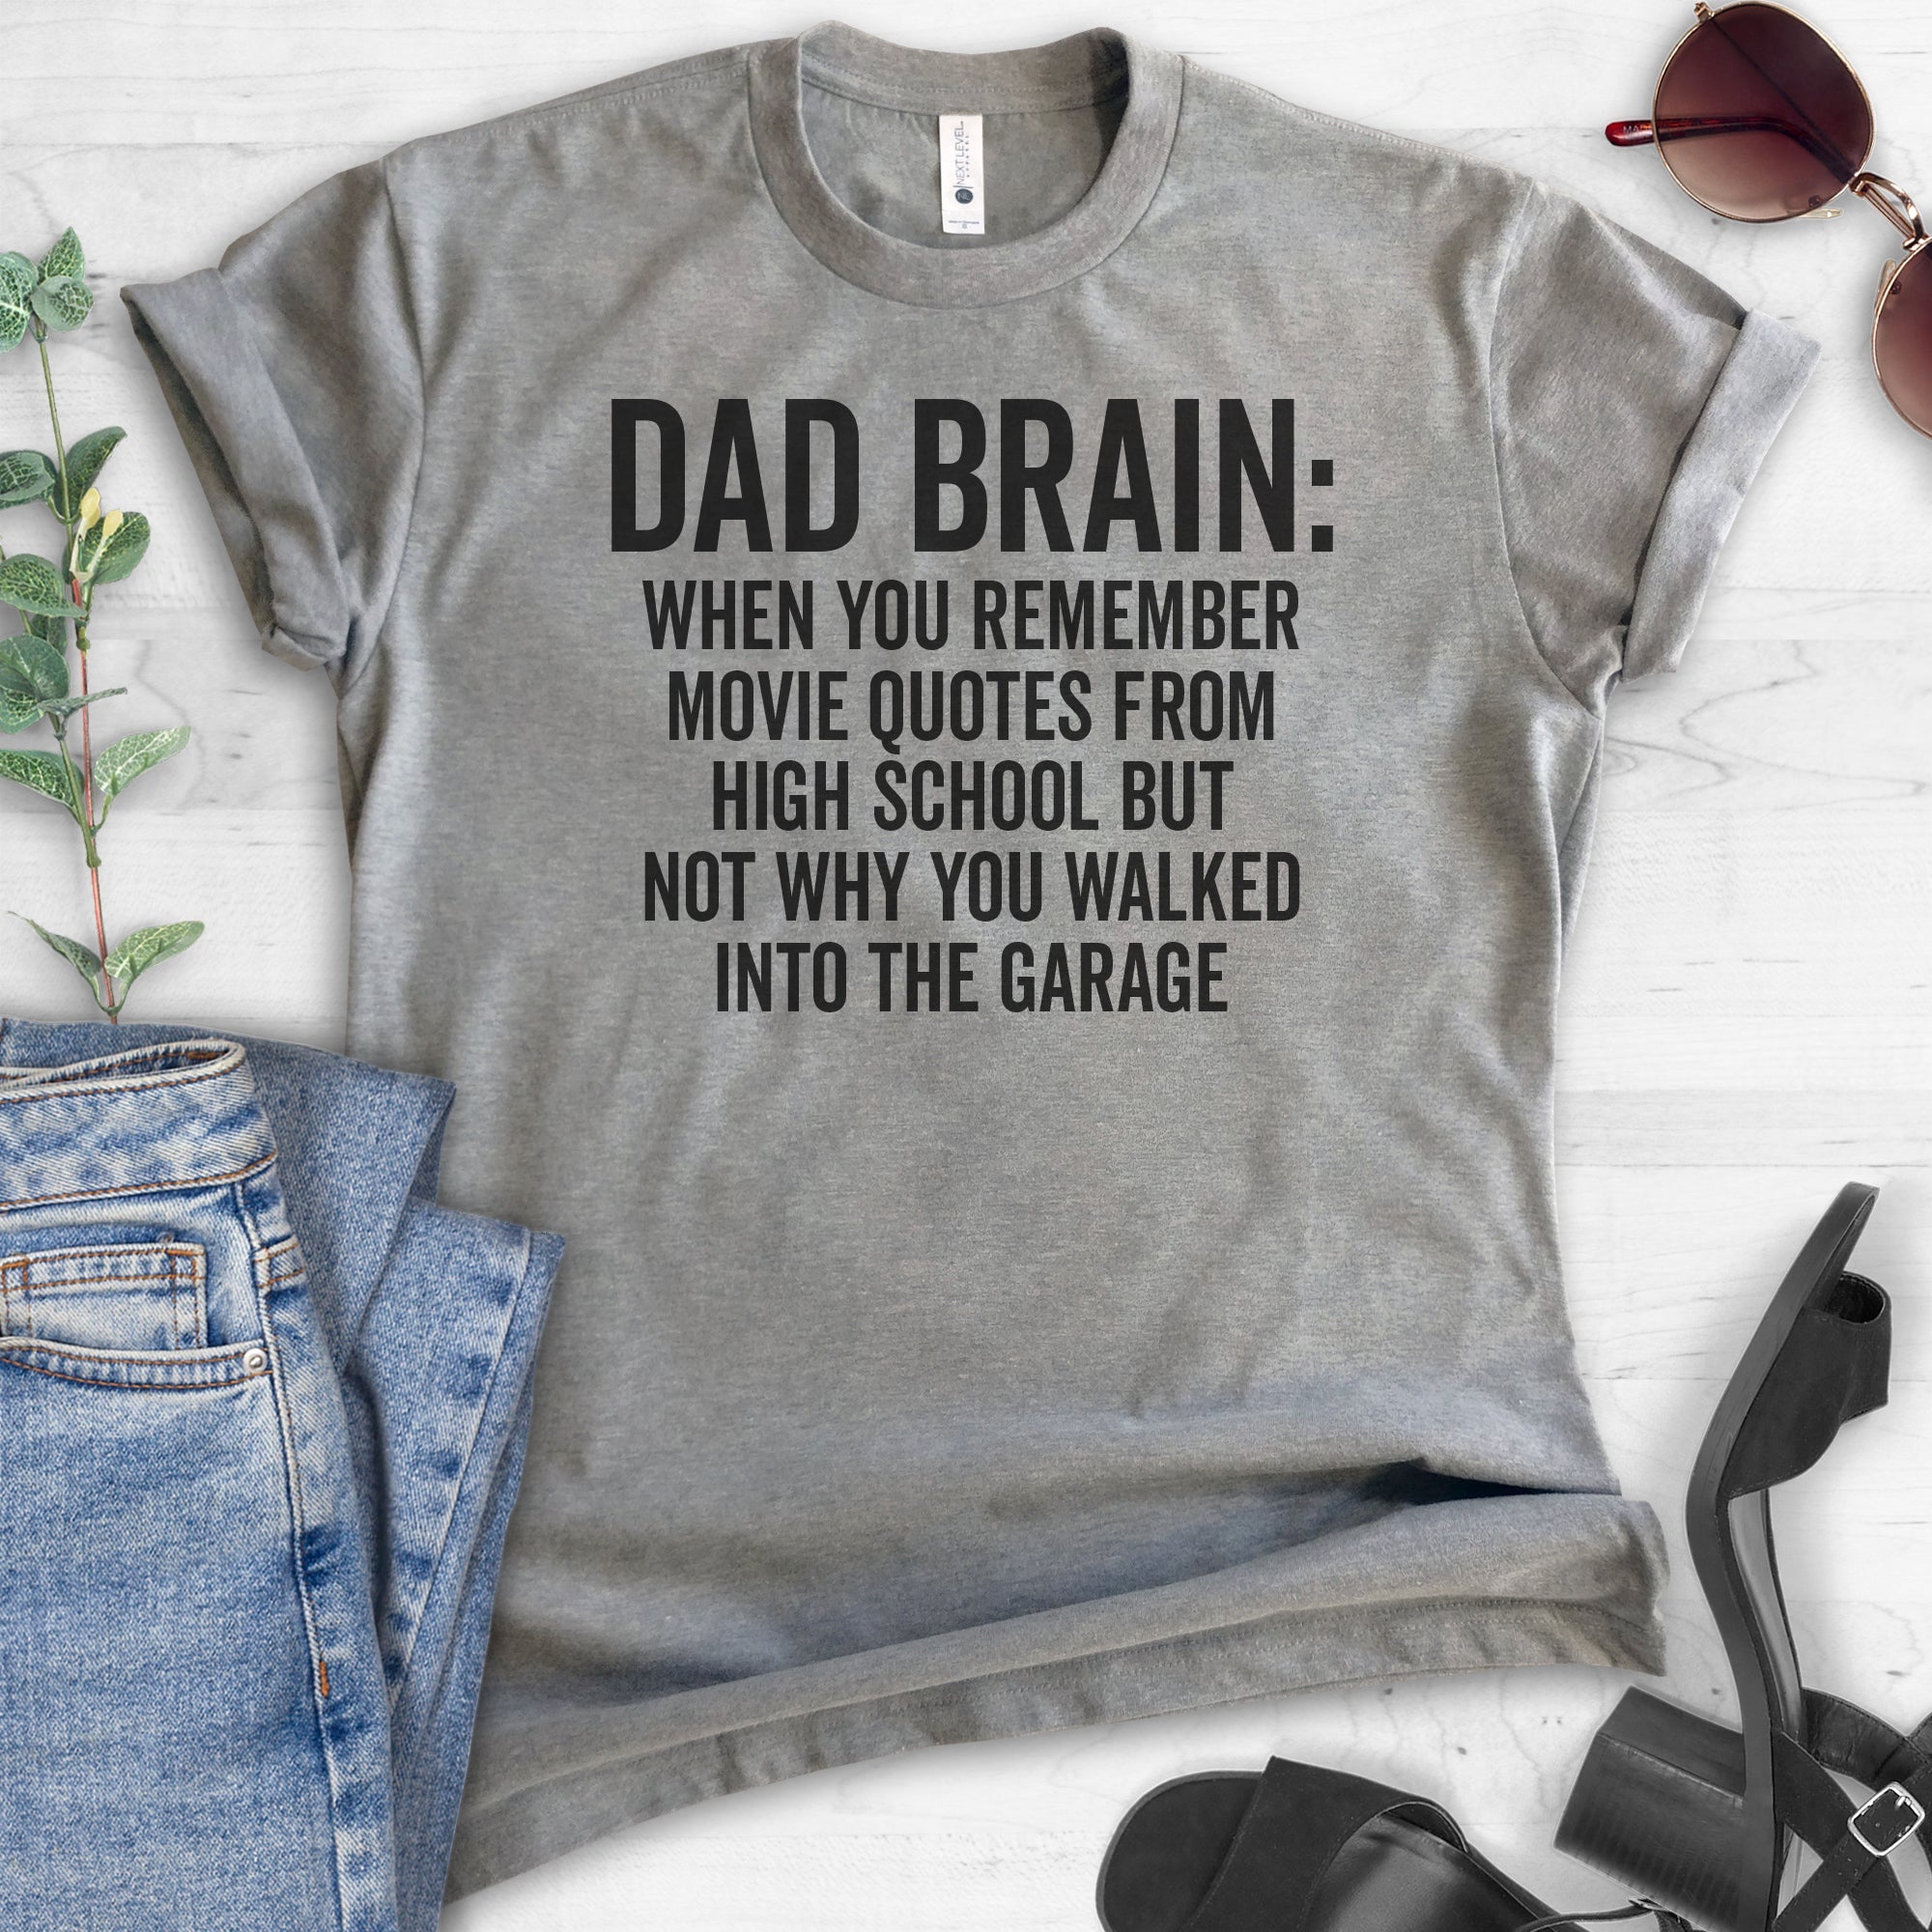 Dad Brain: When You Remember Movie Quotes From High School But… T-shirt